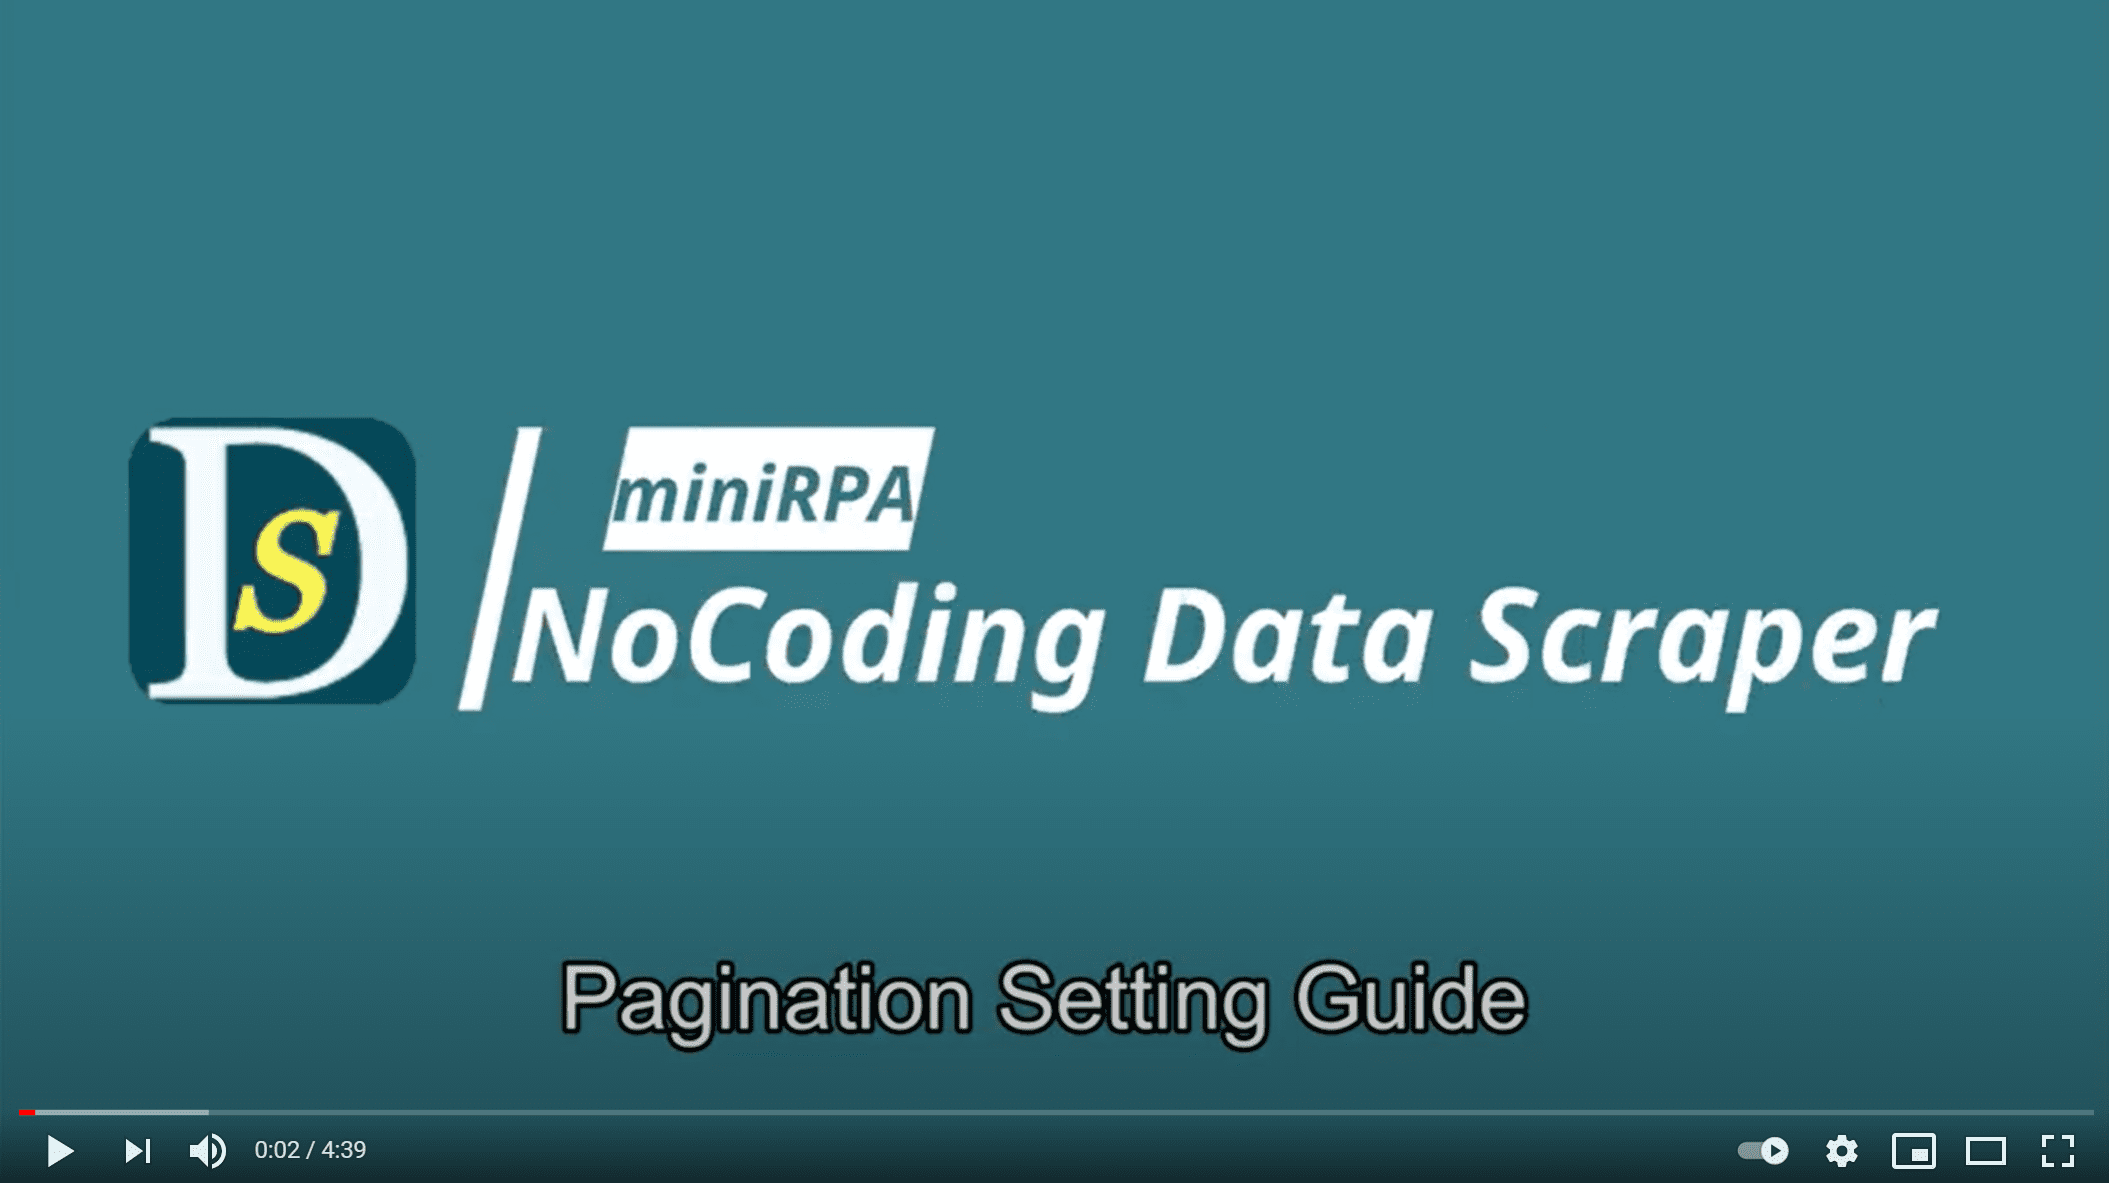 Pagination Setting Guide